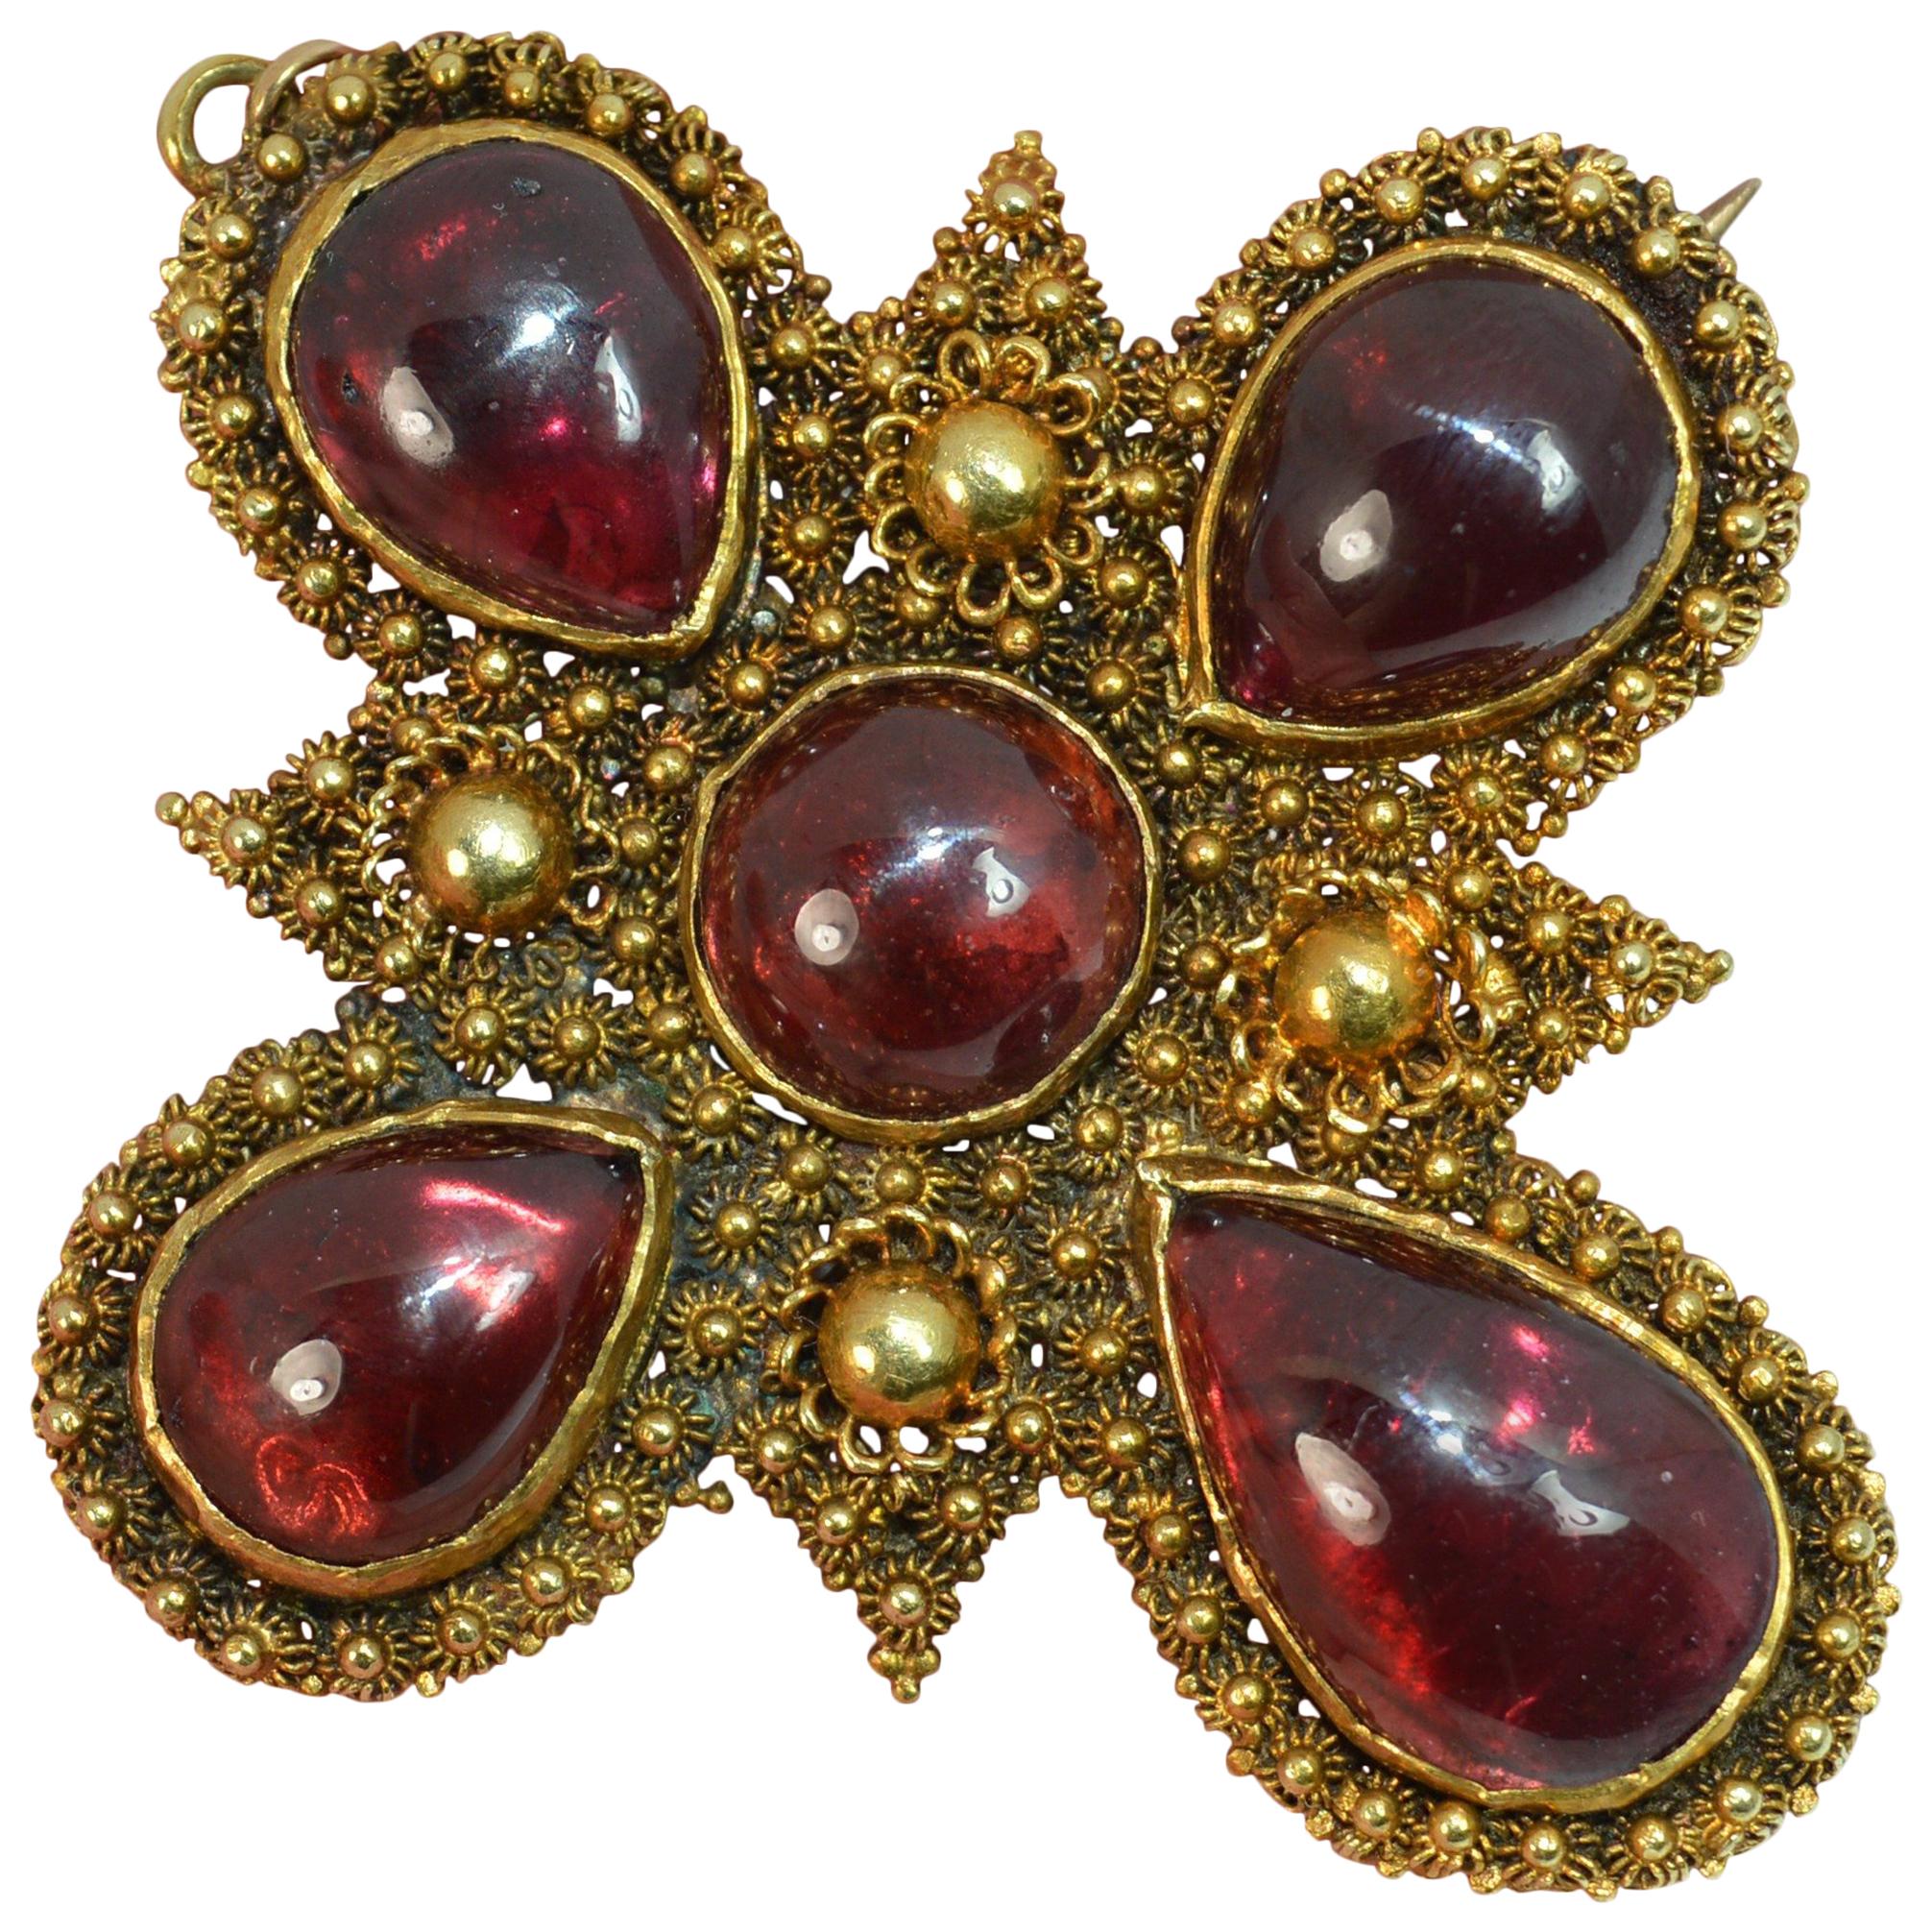 Details about   Stunning 18th Century Silver/Gold & Garnet Closed Back Giardinetti Pin/Brooch 